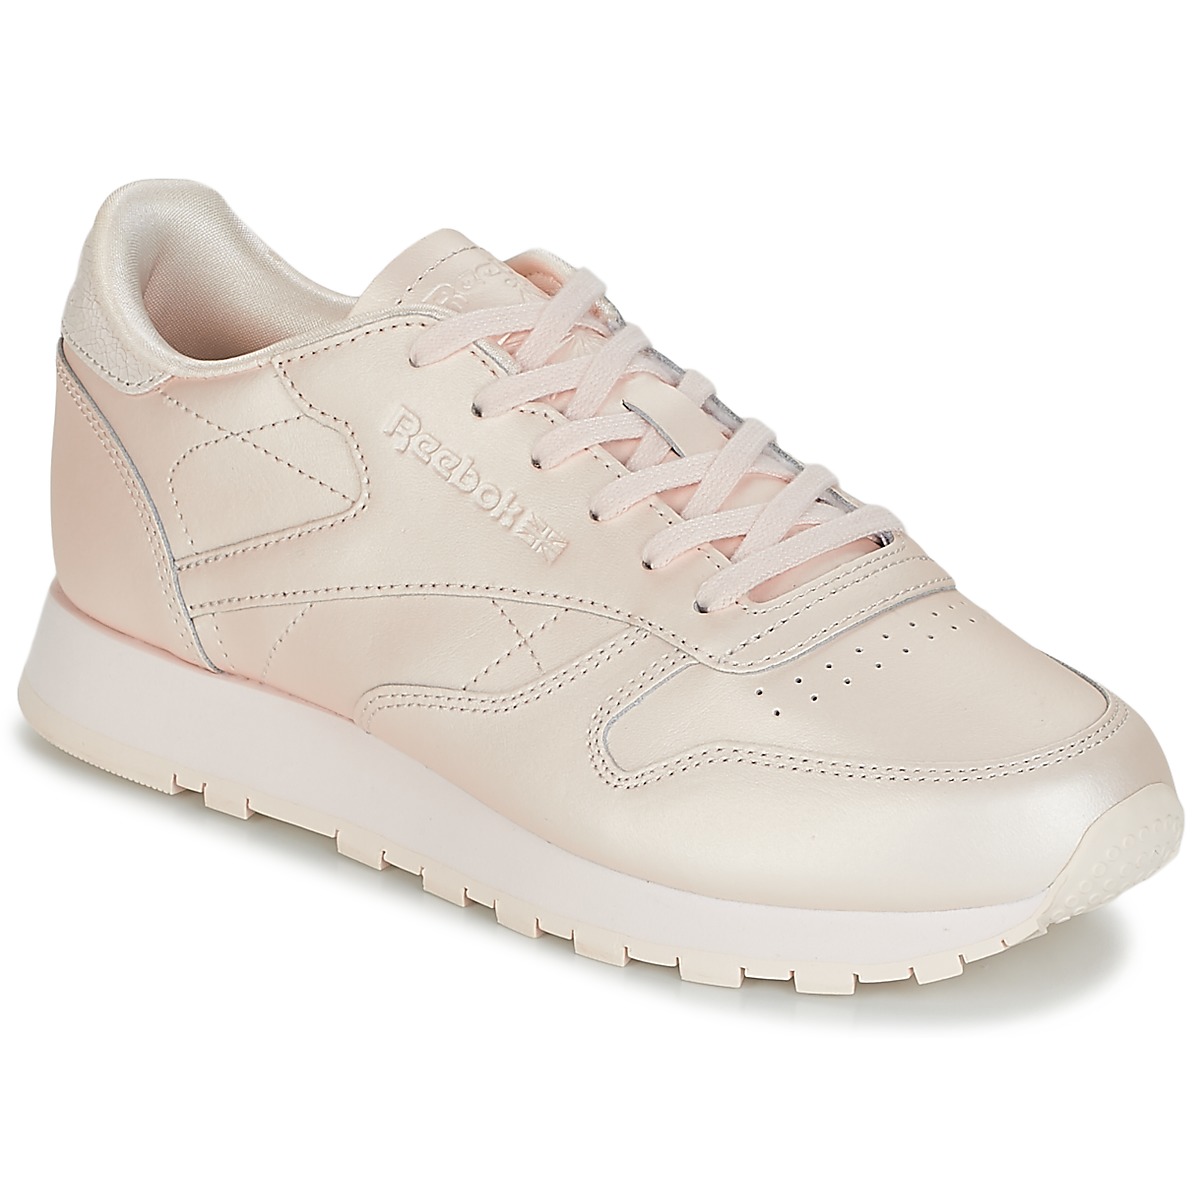 Reebok Classic Women Rose Gold-Toned Melted Metal Leather | islamiyyat.com